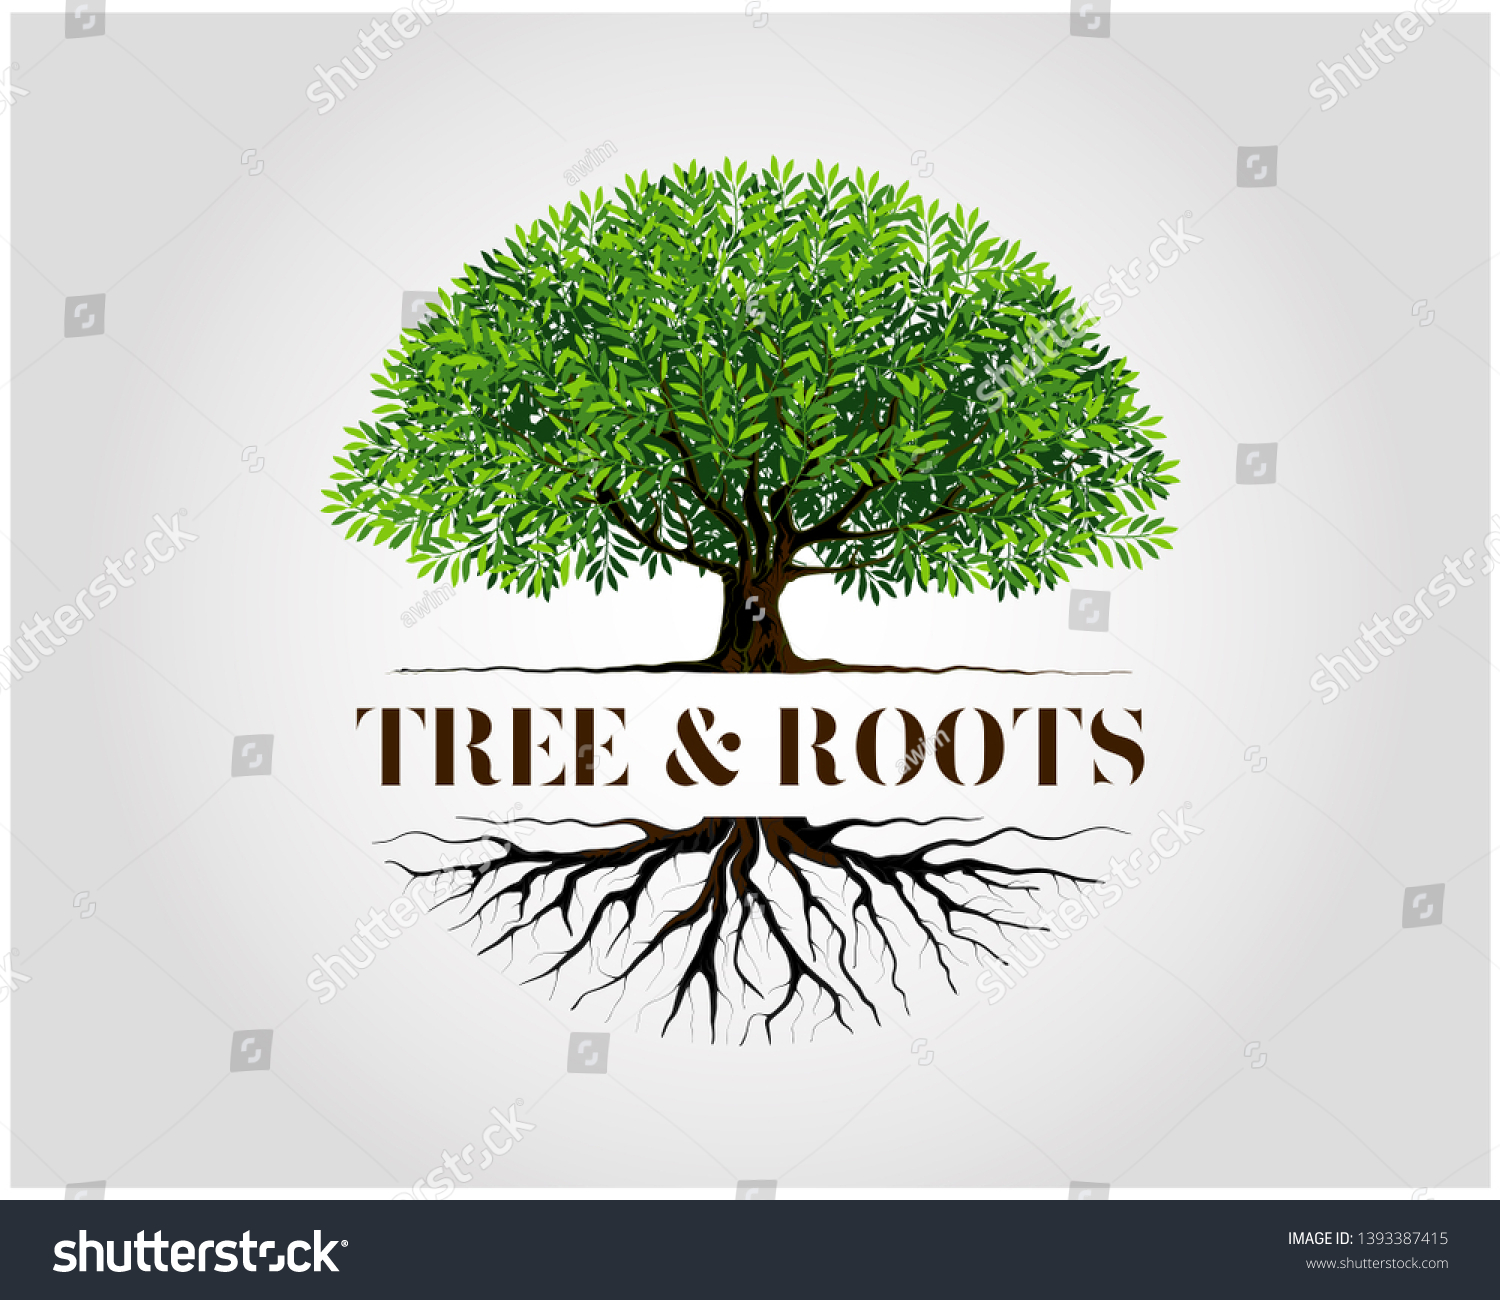 Tree and roots logo design vector isolated,  tree with round shape #1393387415